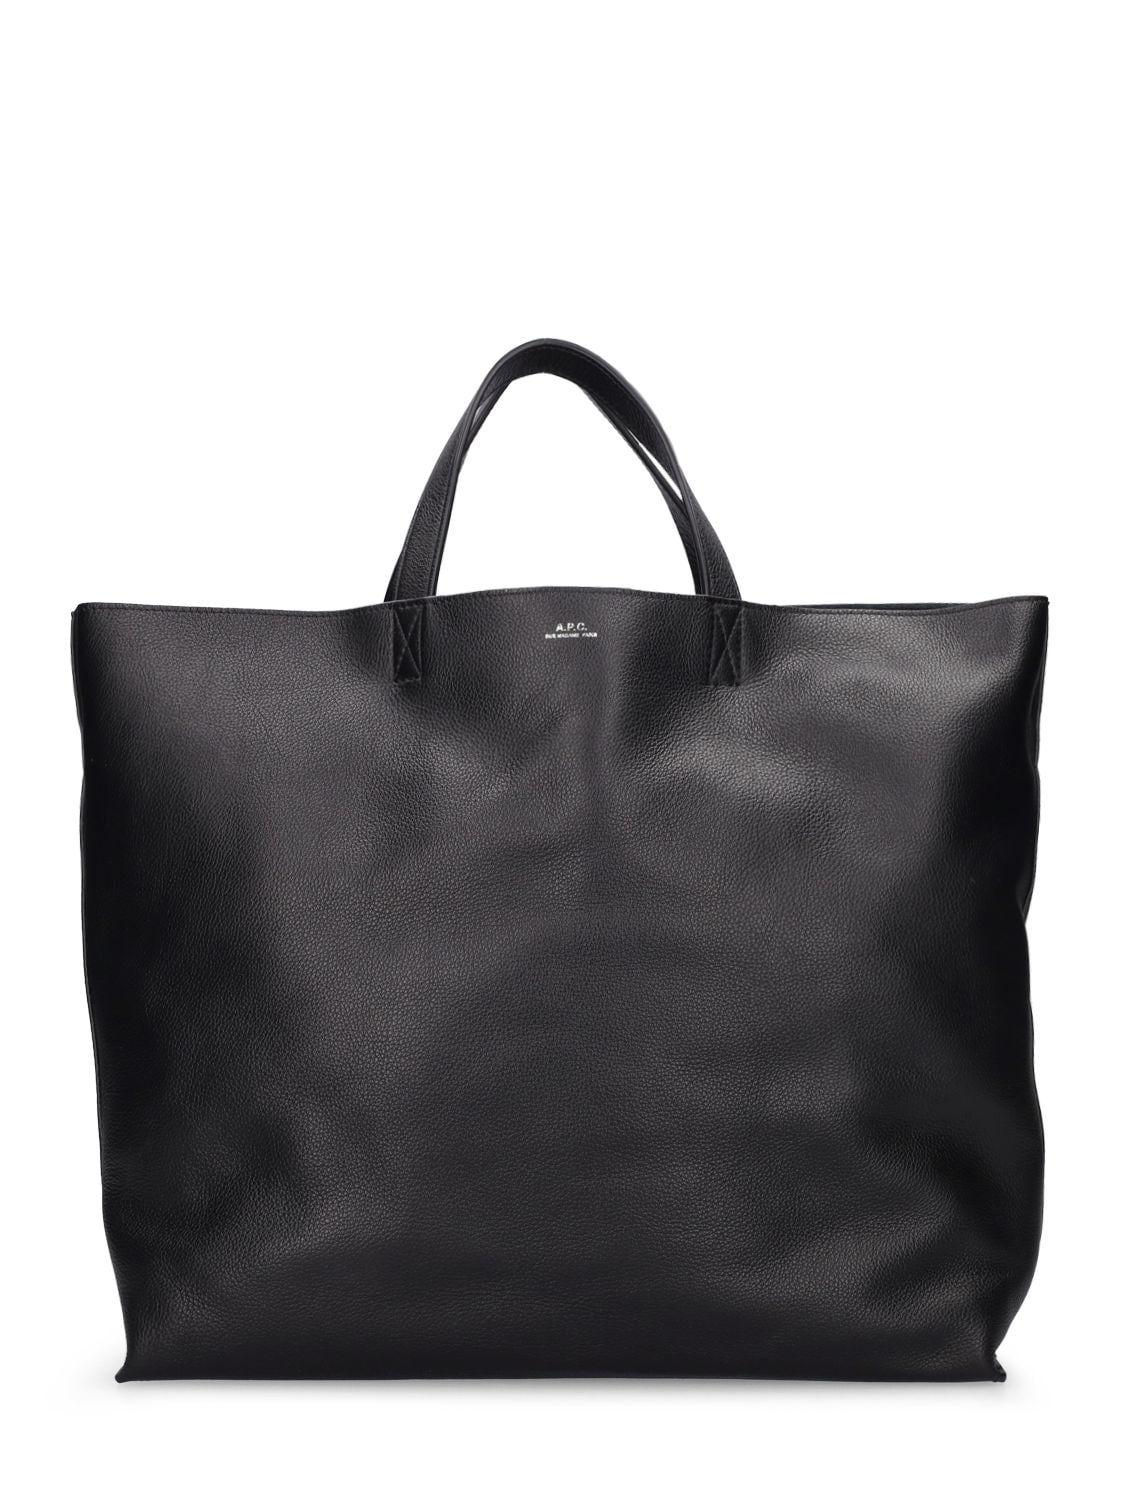 A.P.C. Cabas Maiko Horizontal Tote Bag in Black | Lyst